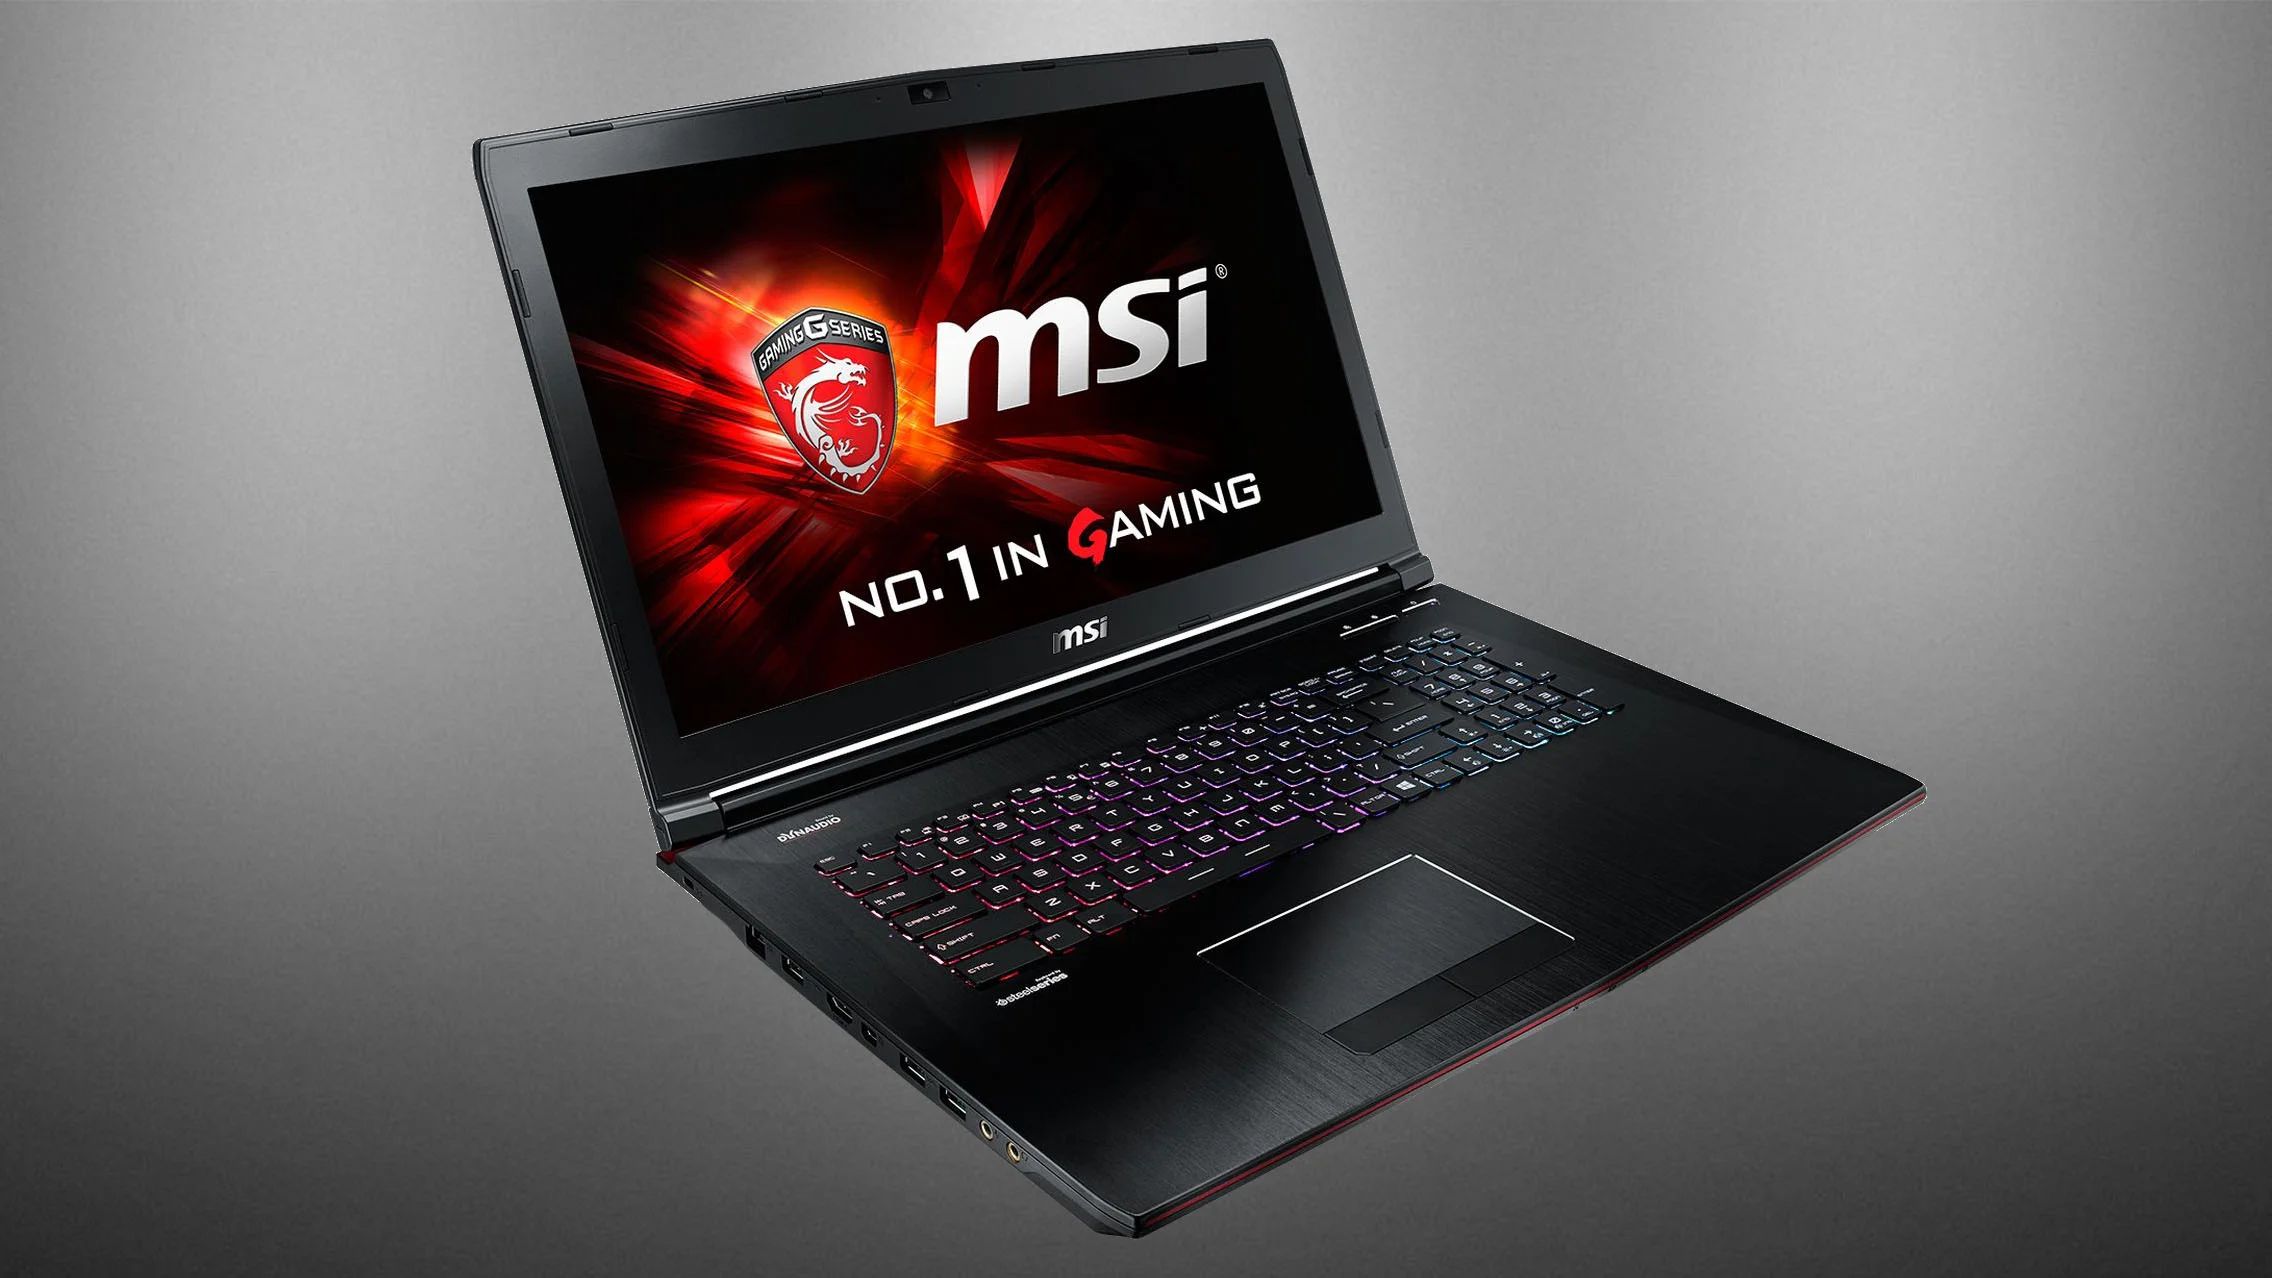 How Many M.2 Slots Does Msi Gaming Laptop Ge72 Have?